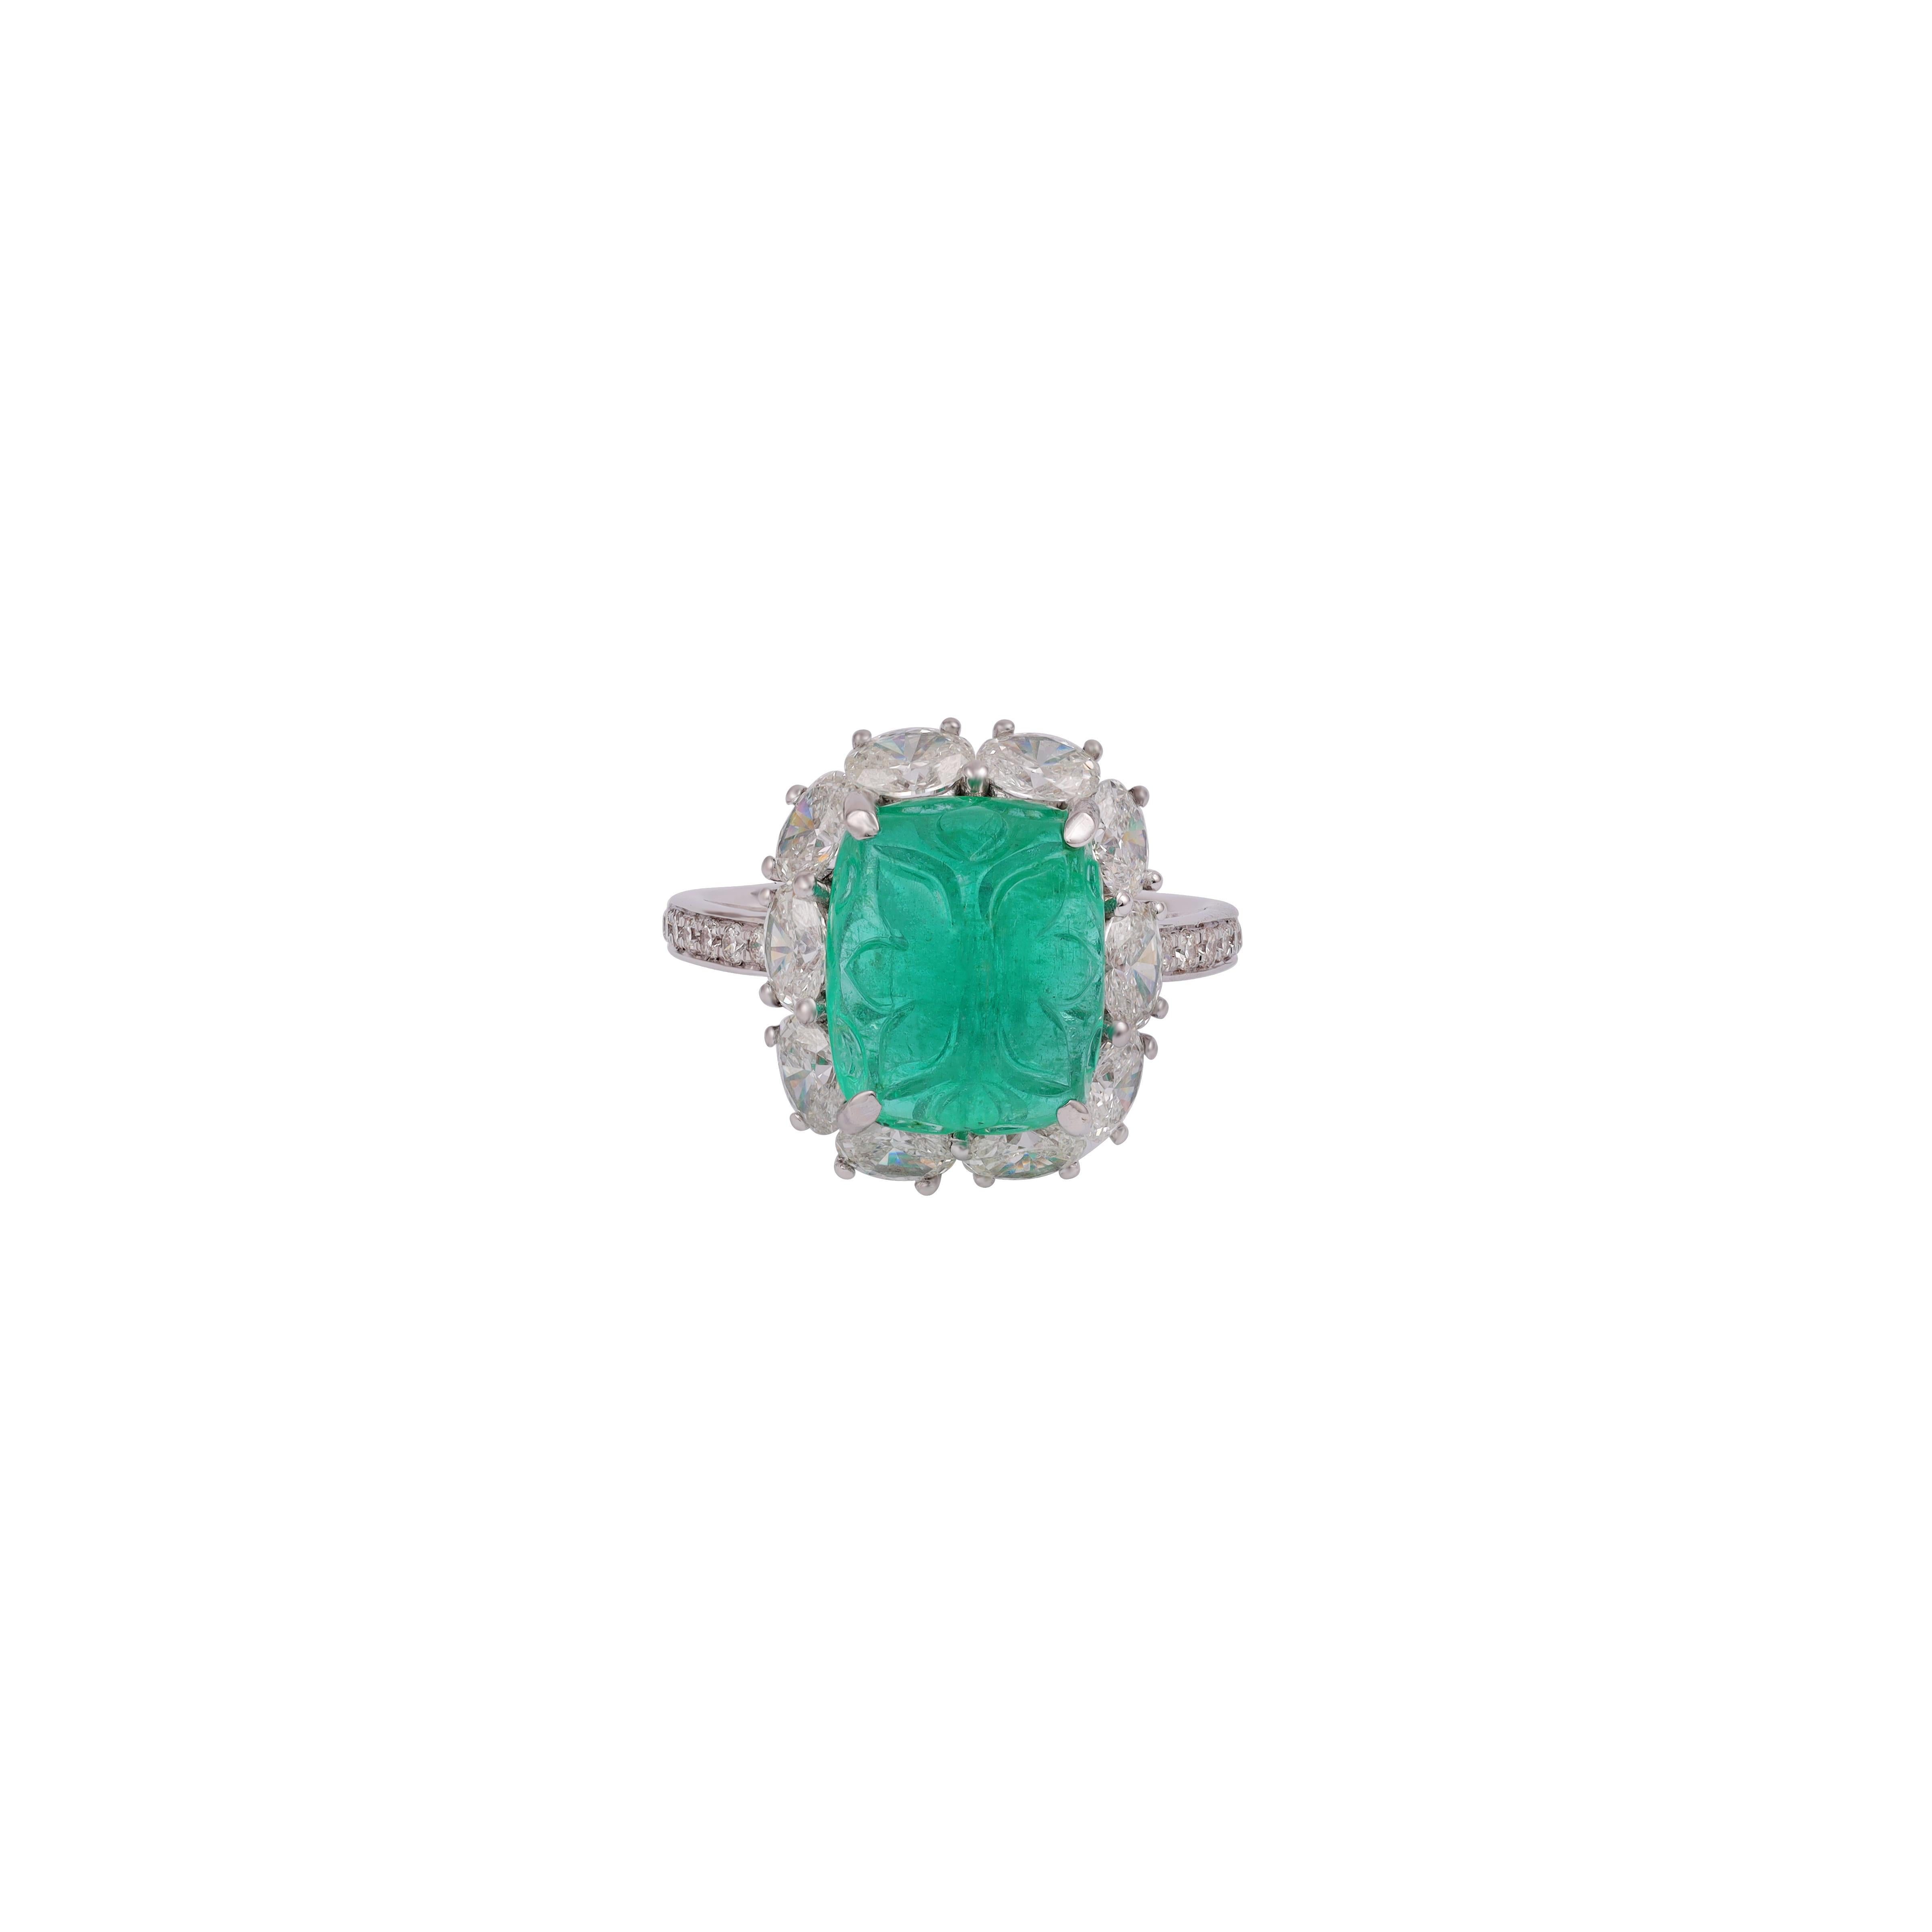 This is an elegant emerald & diamond ring studded in 18k white gold with 1 piece of Carved Zambian emerald weight 6.46 carat which is surrounded by 10 pieces of round shaped diamonds weight 1.86 carat, this entire ring studded in 18k white gold